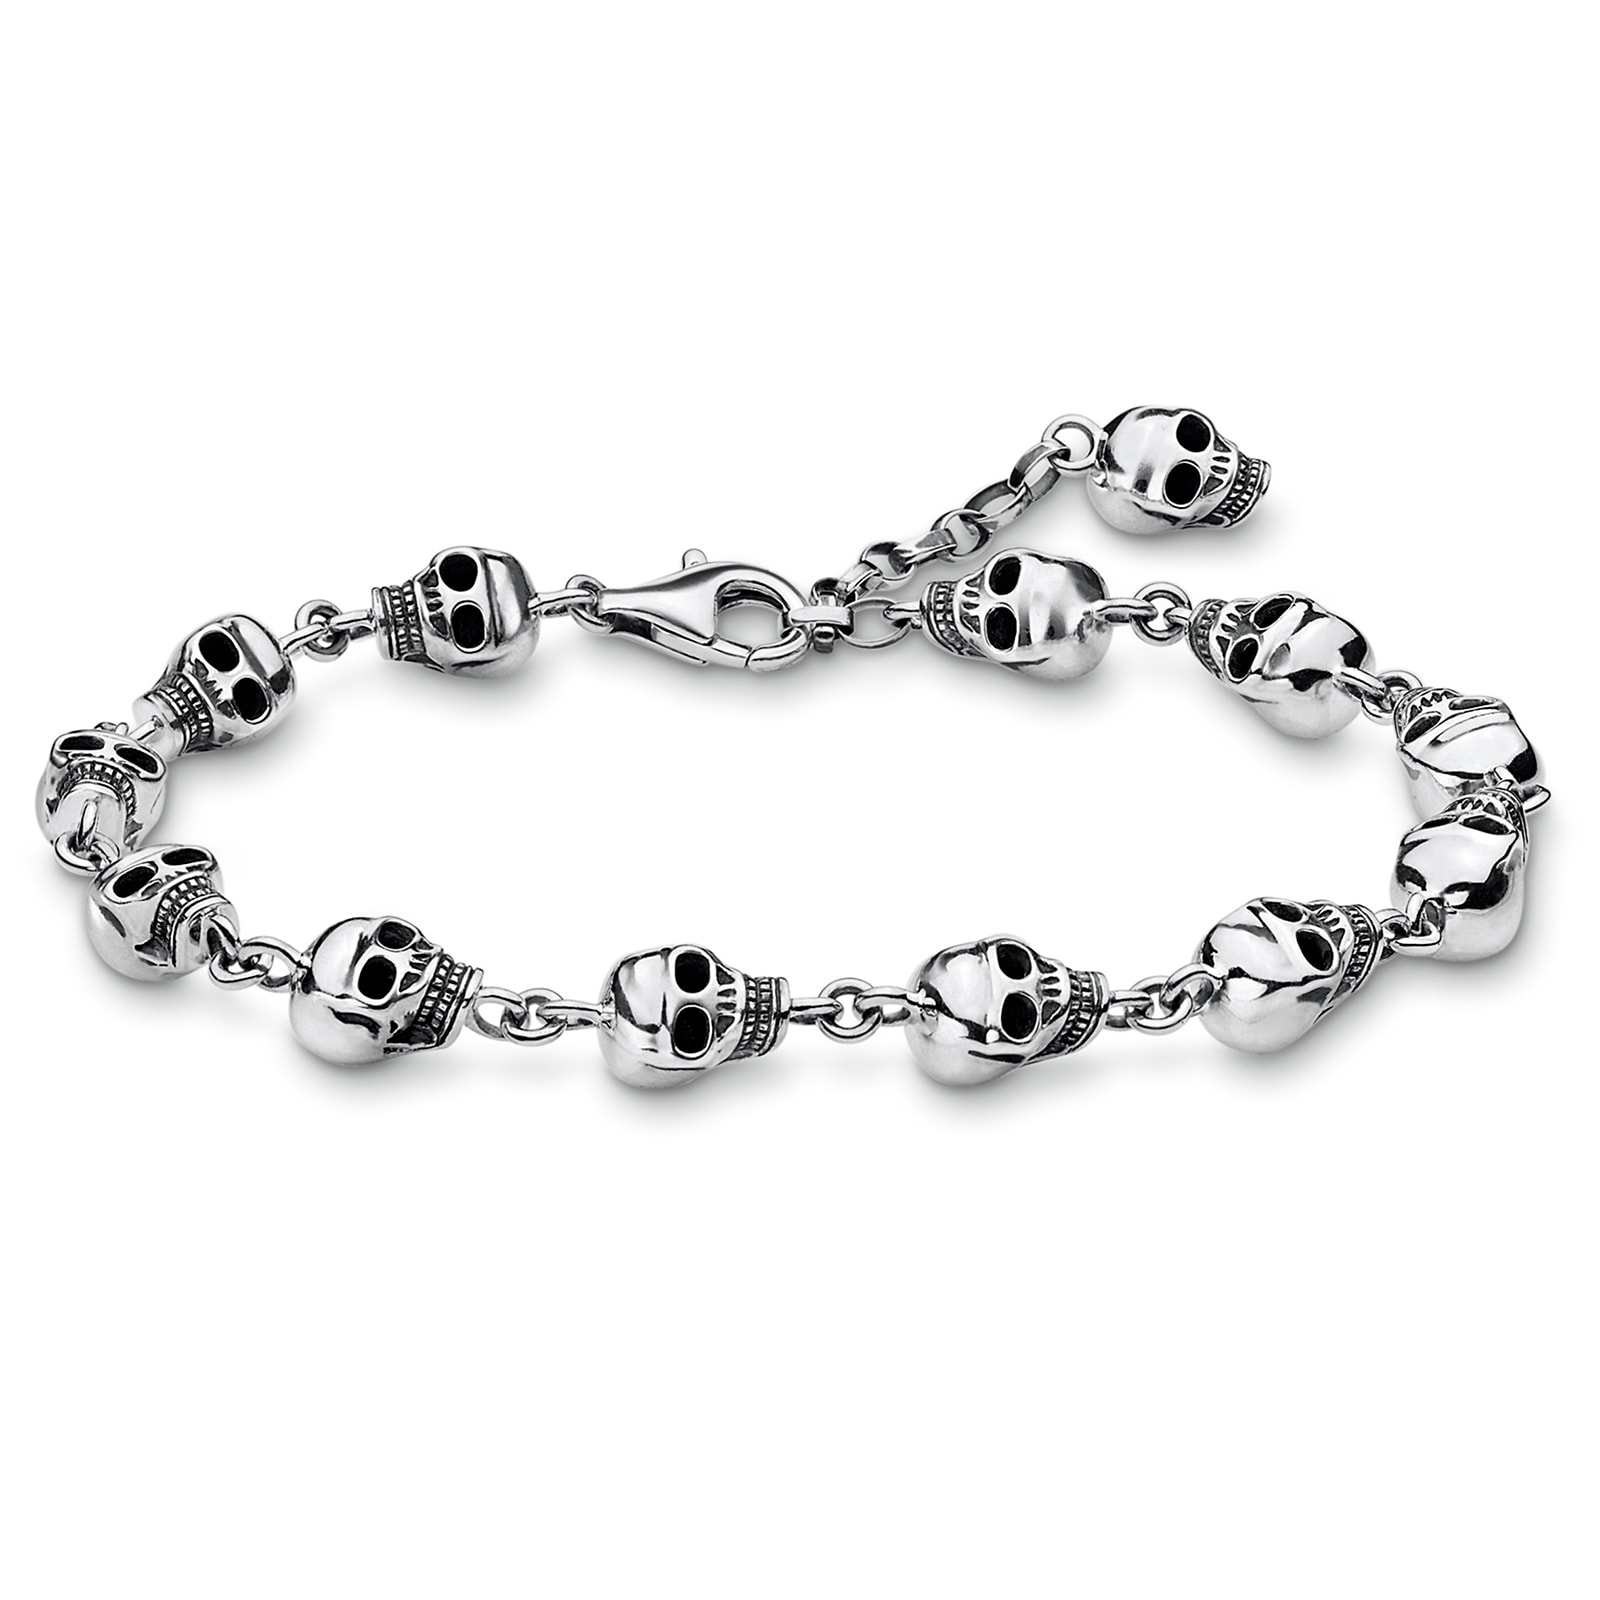 Buy MY PARTY SUPPLIERS Jagmag® Skull Shaped Bracelet for  Halloween/Halloween Skull Bracelet Skull Head Wrist Chain White Wrist Cuff  Bracelets at Amazon.in